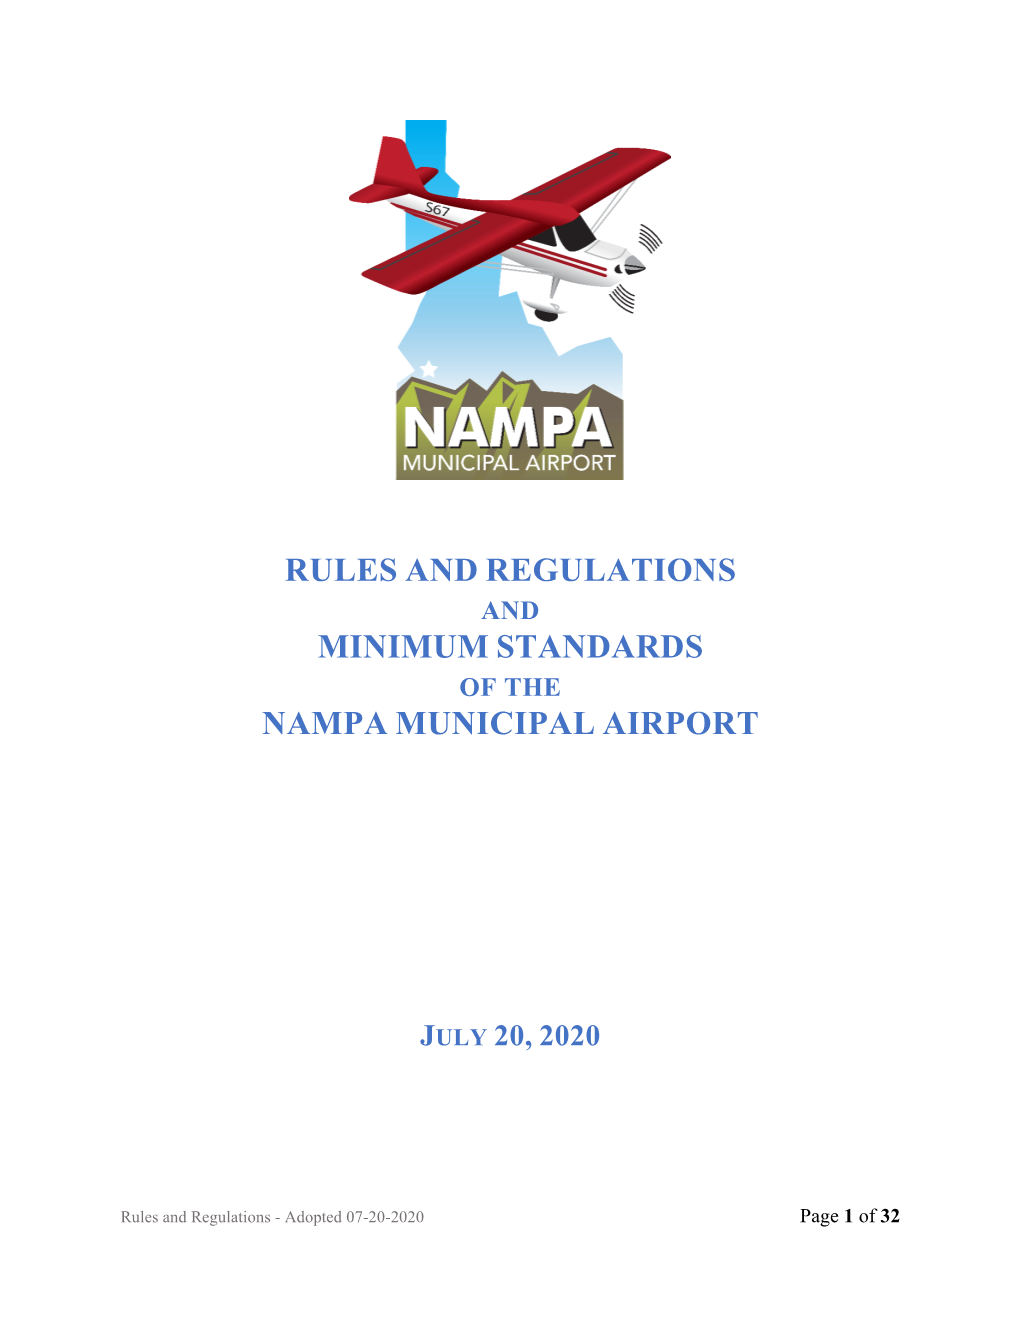 Rules and Regulations and the Minimum Standards